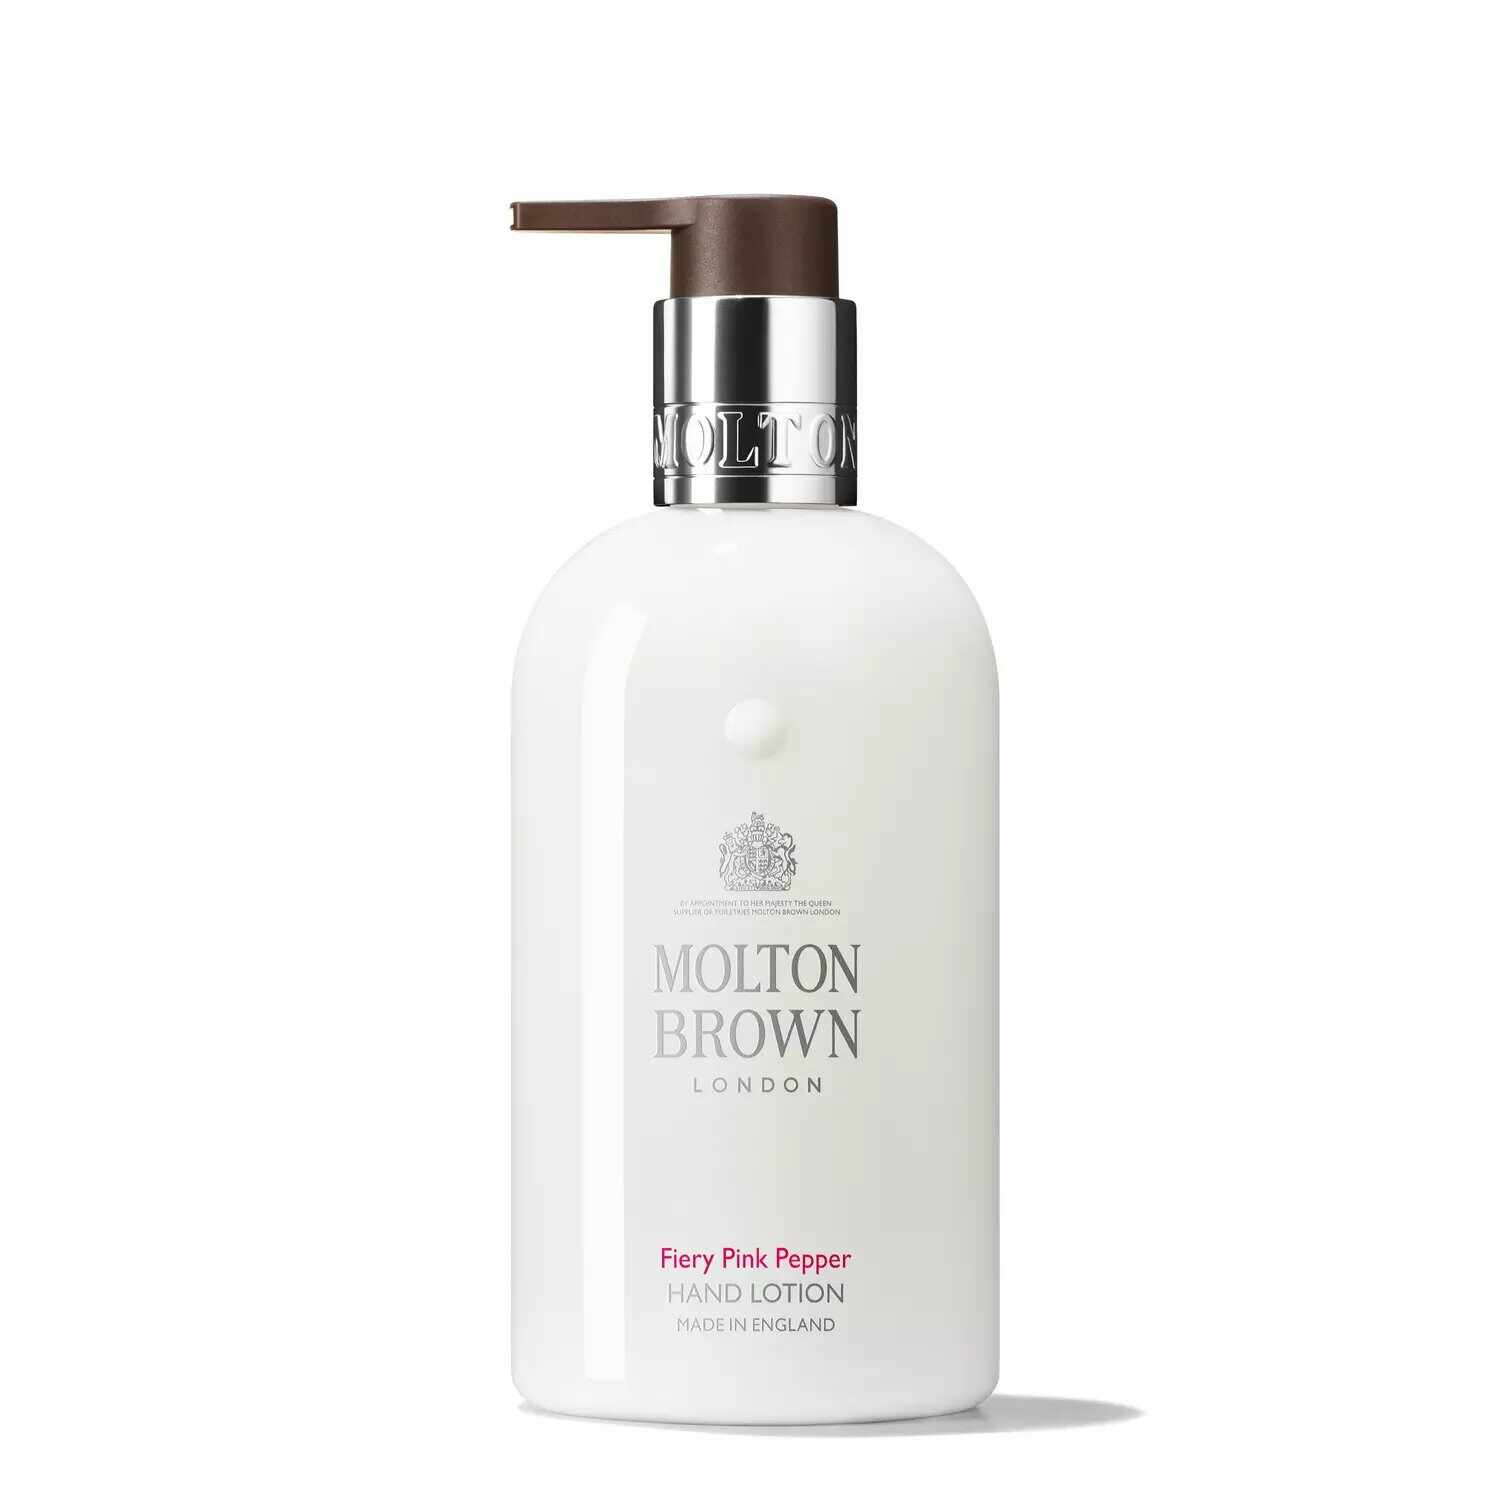 Molton Brown, Fiery Pink Pepper, Hand Lotion, 300 ml